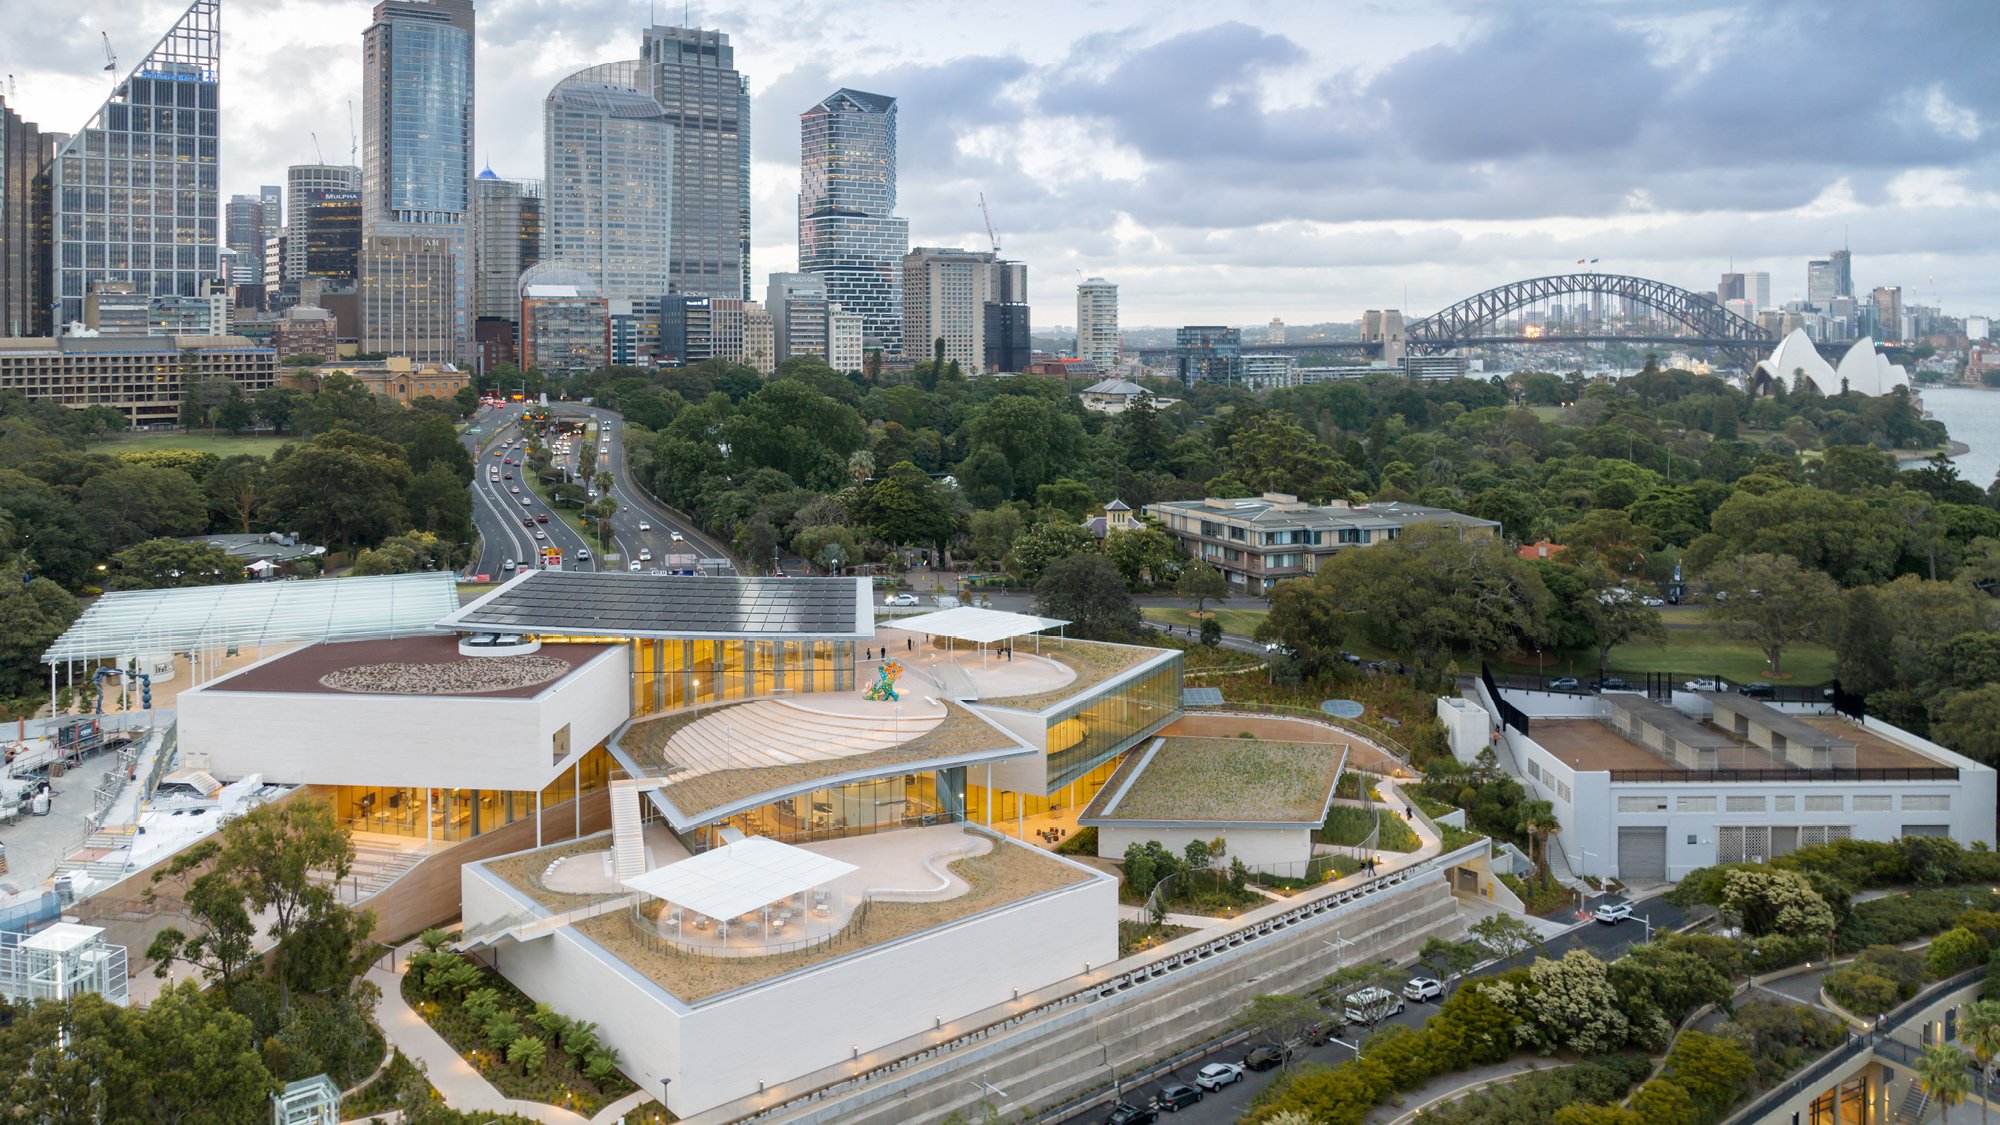 Arial view of Sydney city looking over Art Gallery of New South Wales Sydney Modern Project with Sydney Harbour Bridge in background